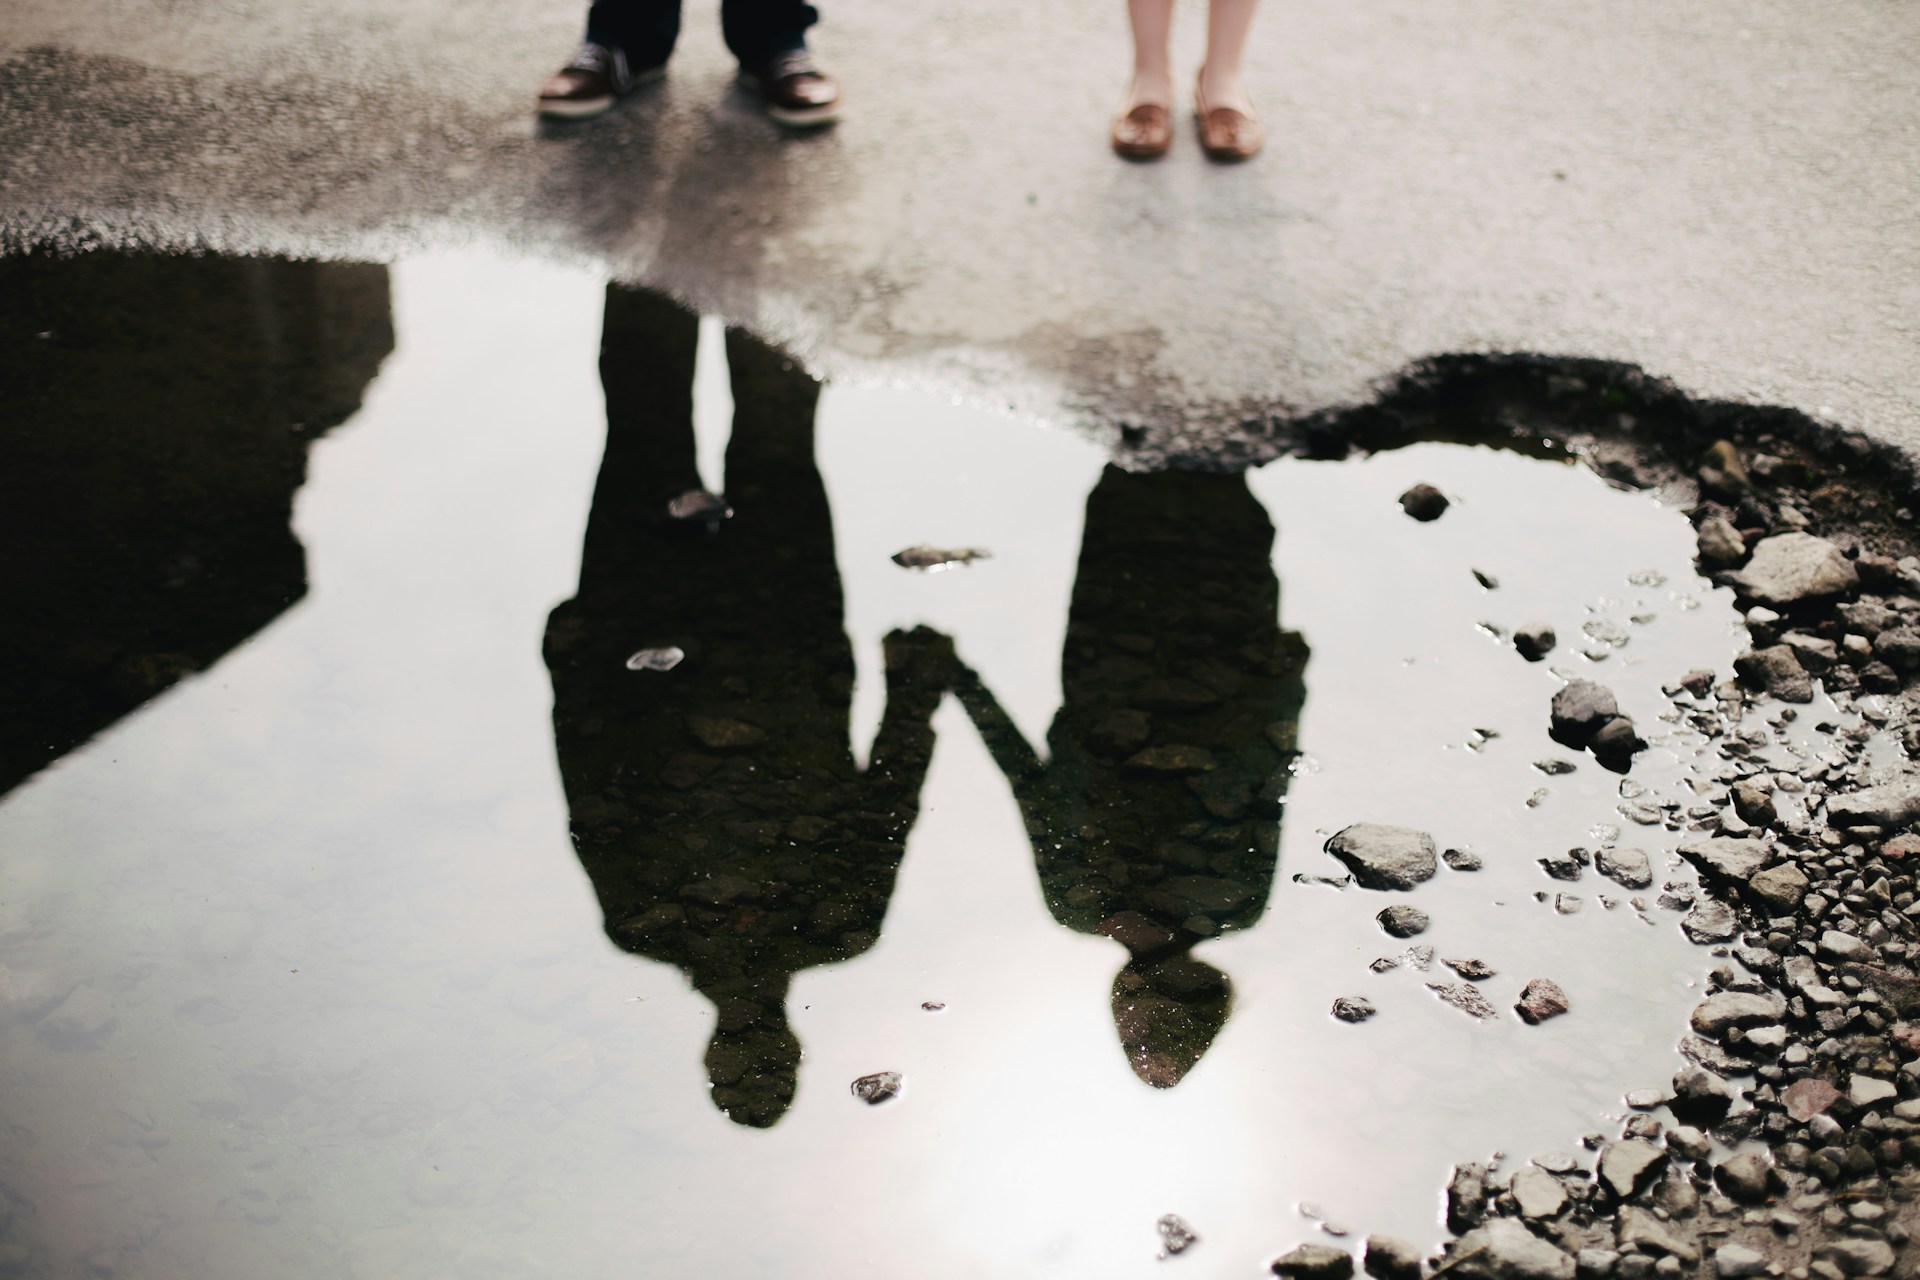 The reflection of two people holding hands is seen in a rain puddle.